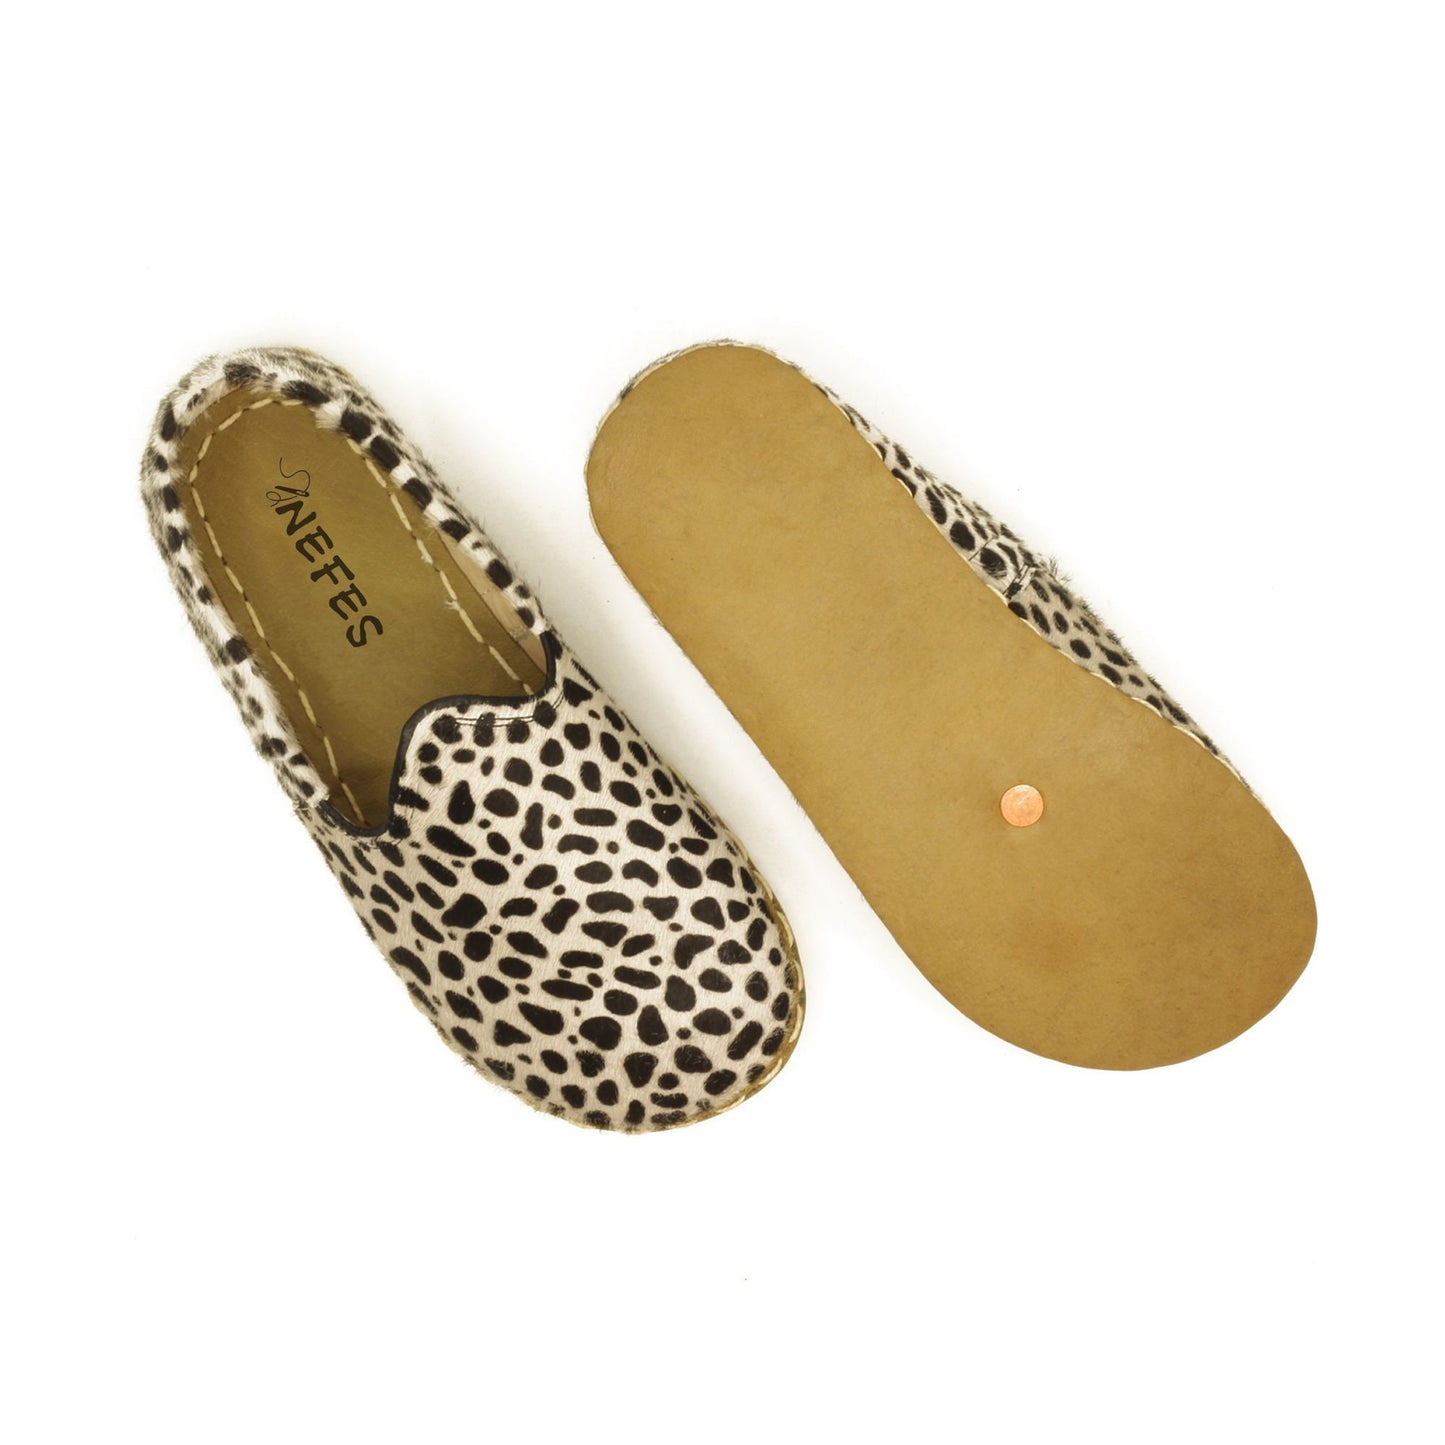 Women - Handmade - Barefoot - Leather Shoes, Classic- Leopard